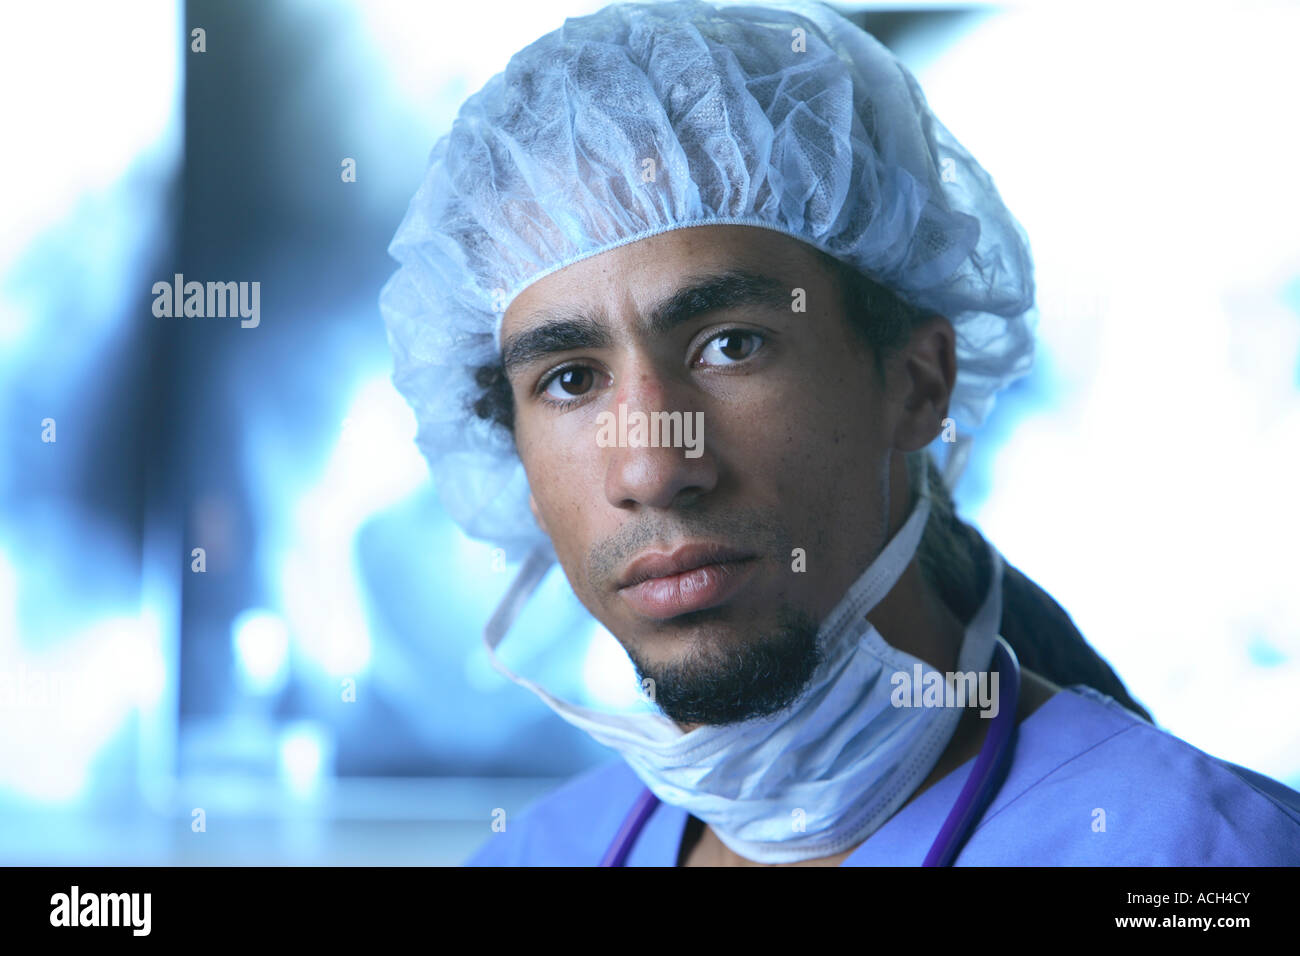 Portrait of young doctor in scrubs Stock Photo